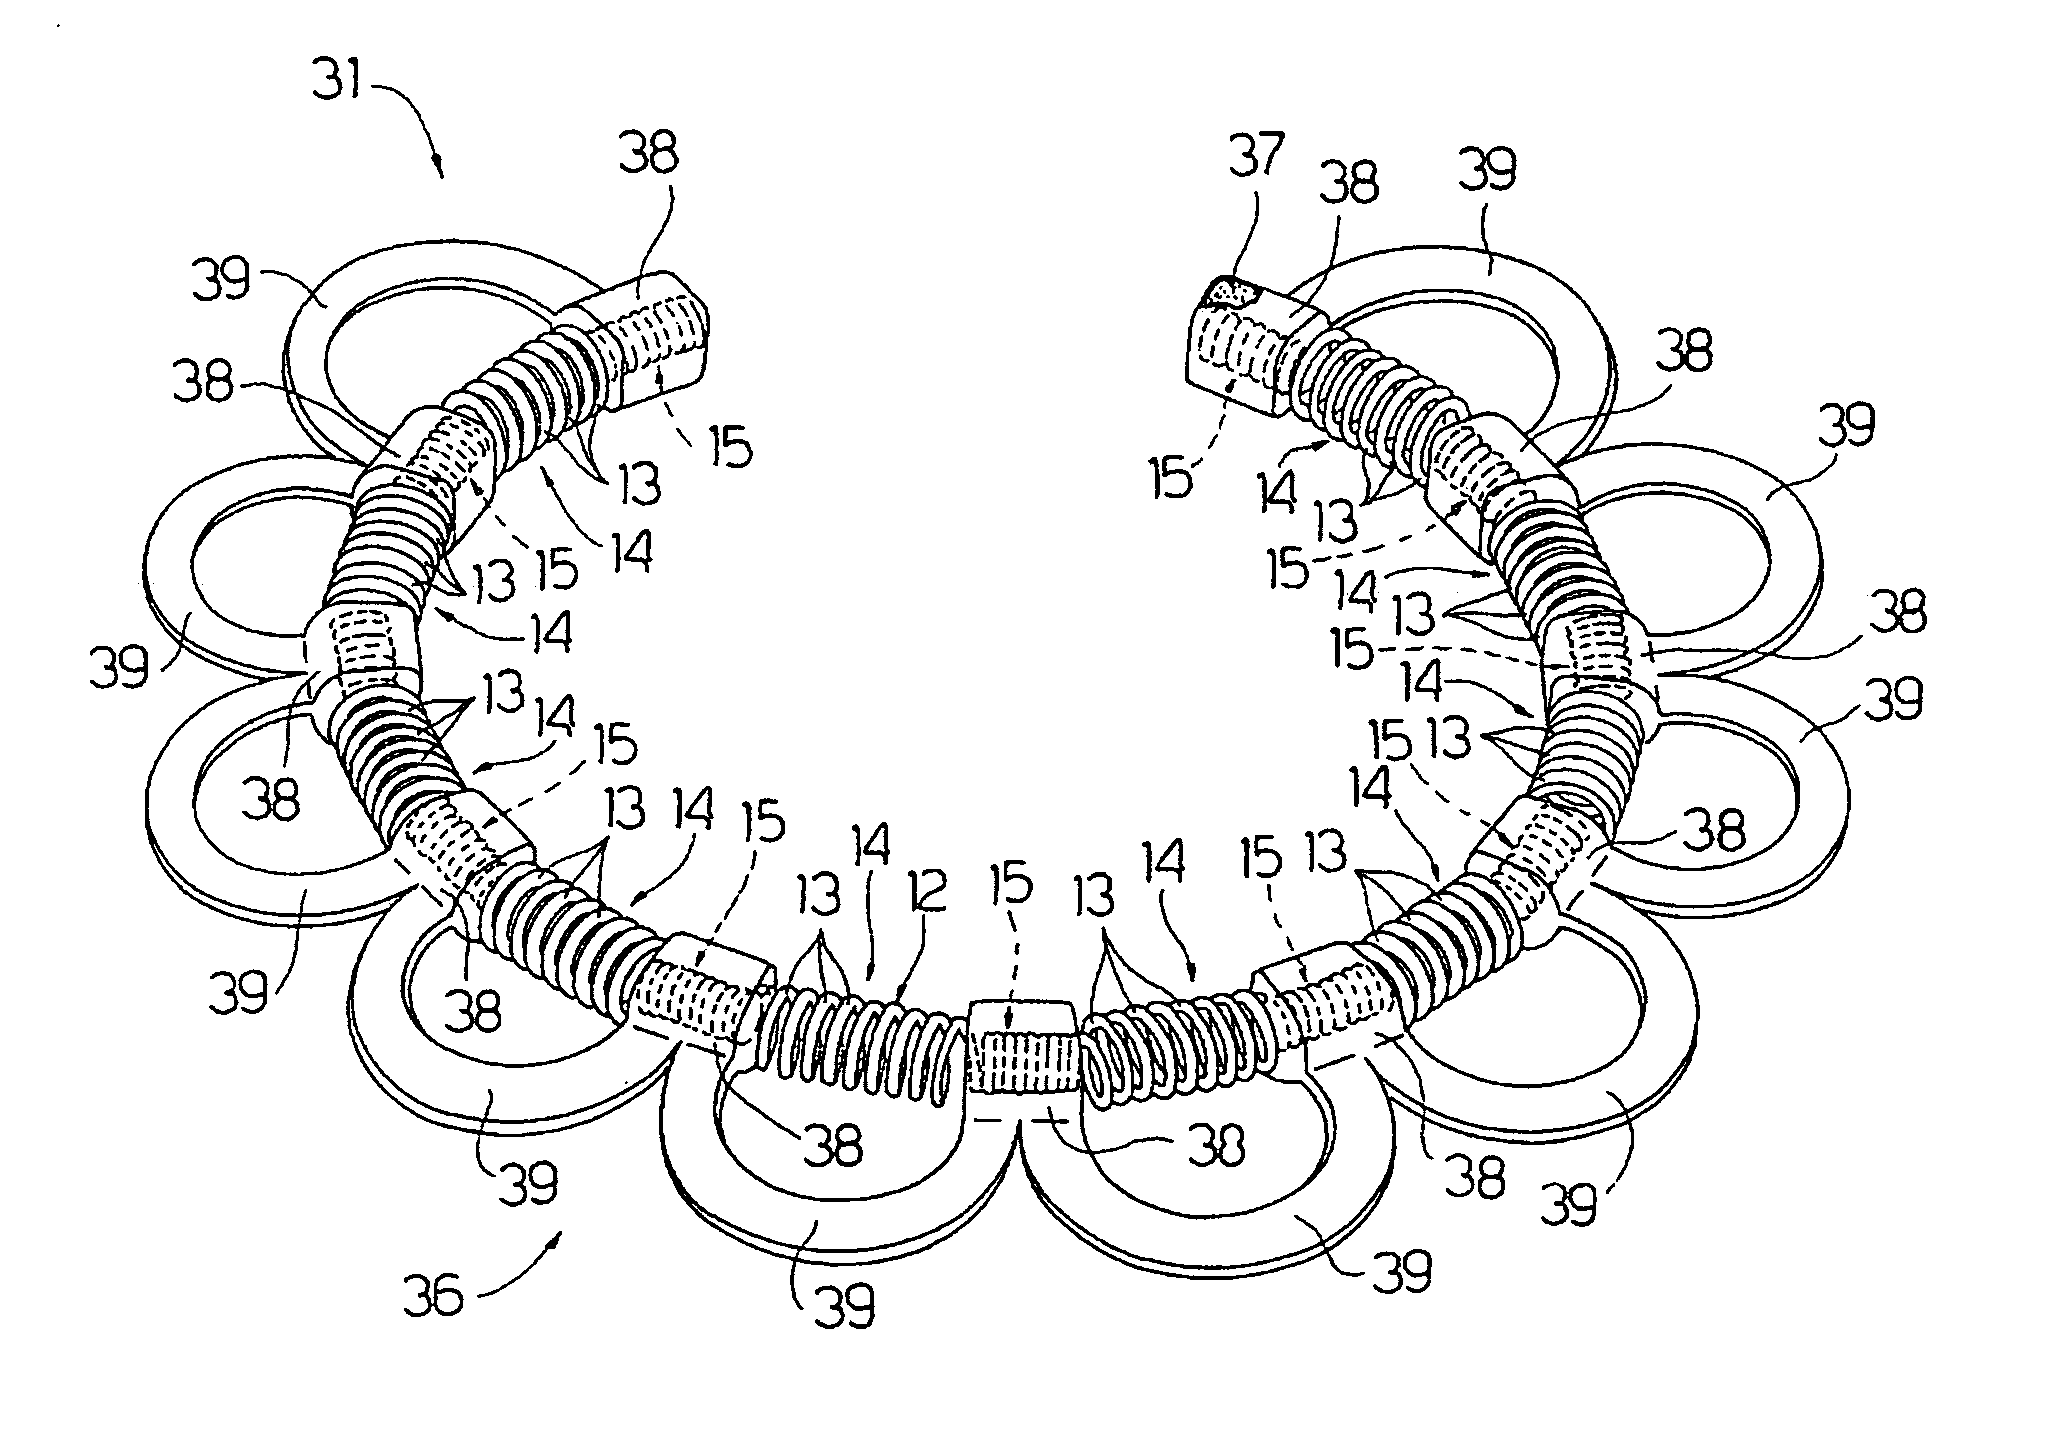 Intracardiac device for restoring the functional elasticity of the cardiac structures, holding tool for the intracardiac device, and method for implantation of the intracardiac device in the heart